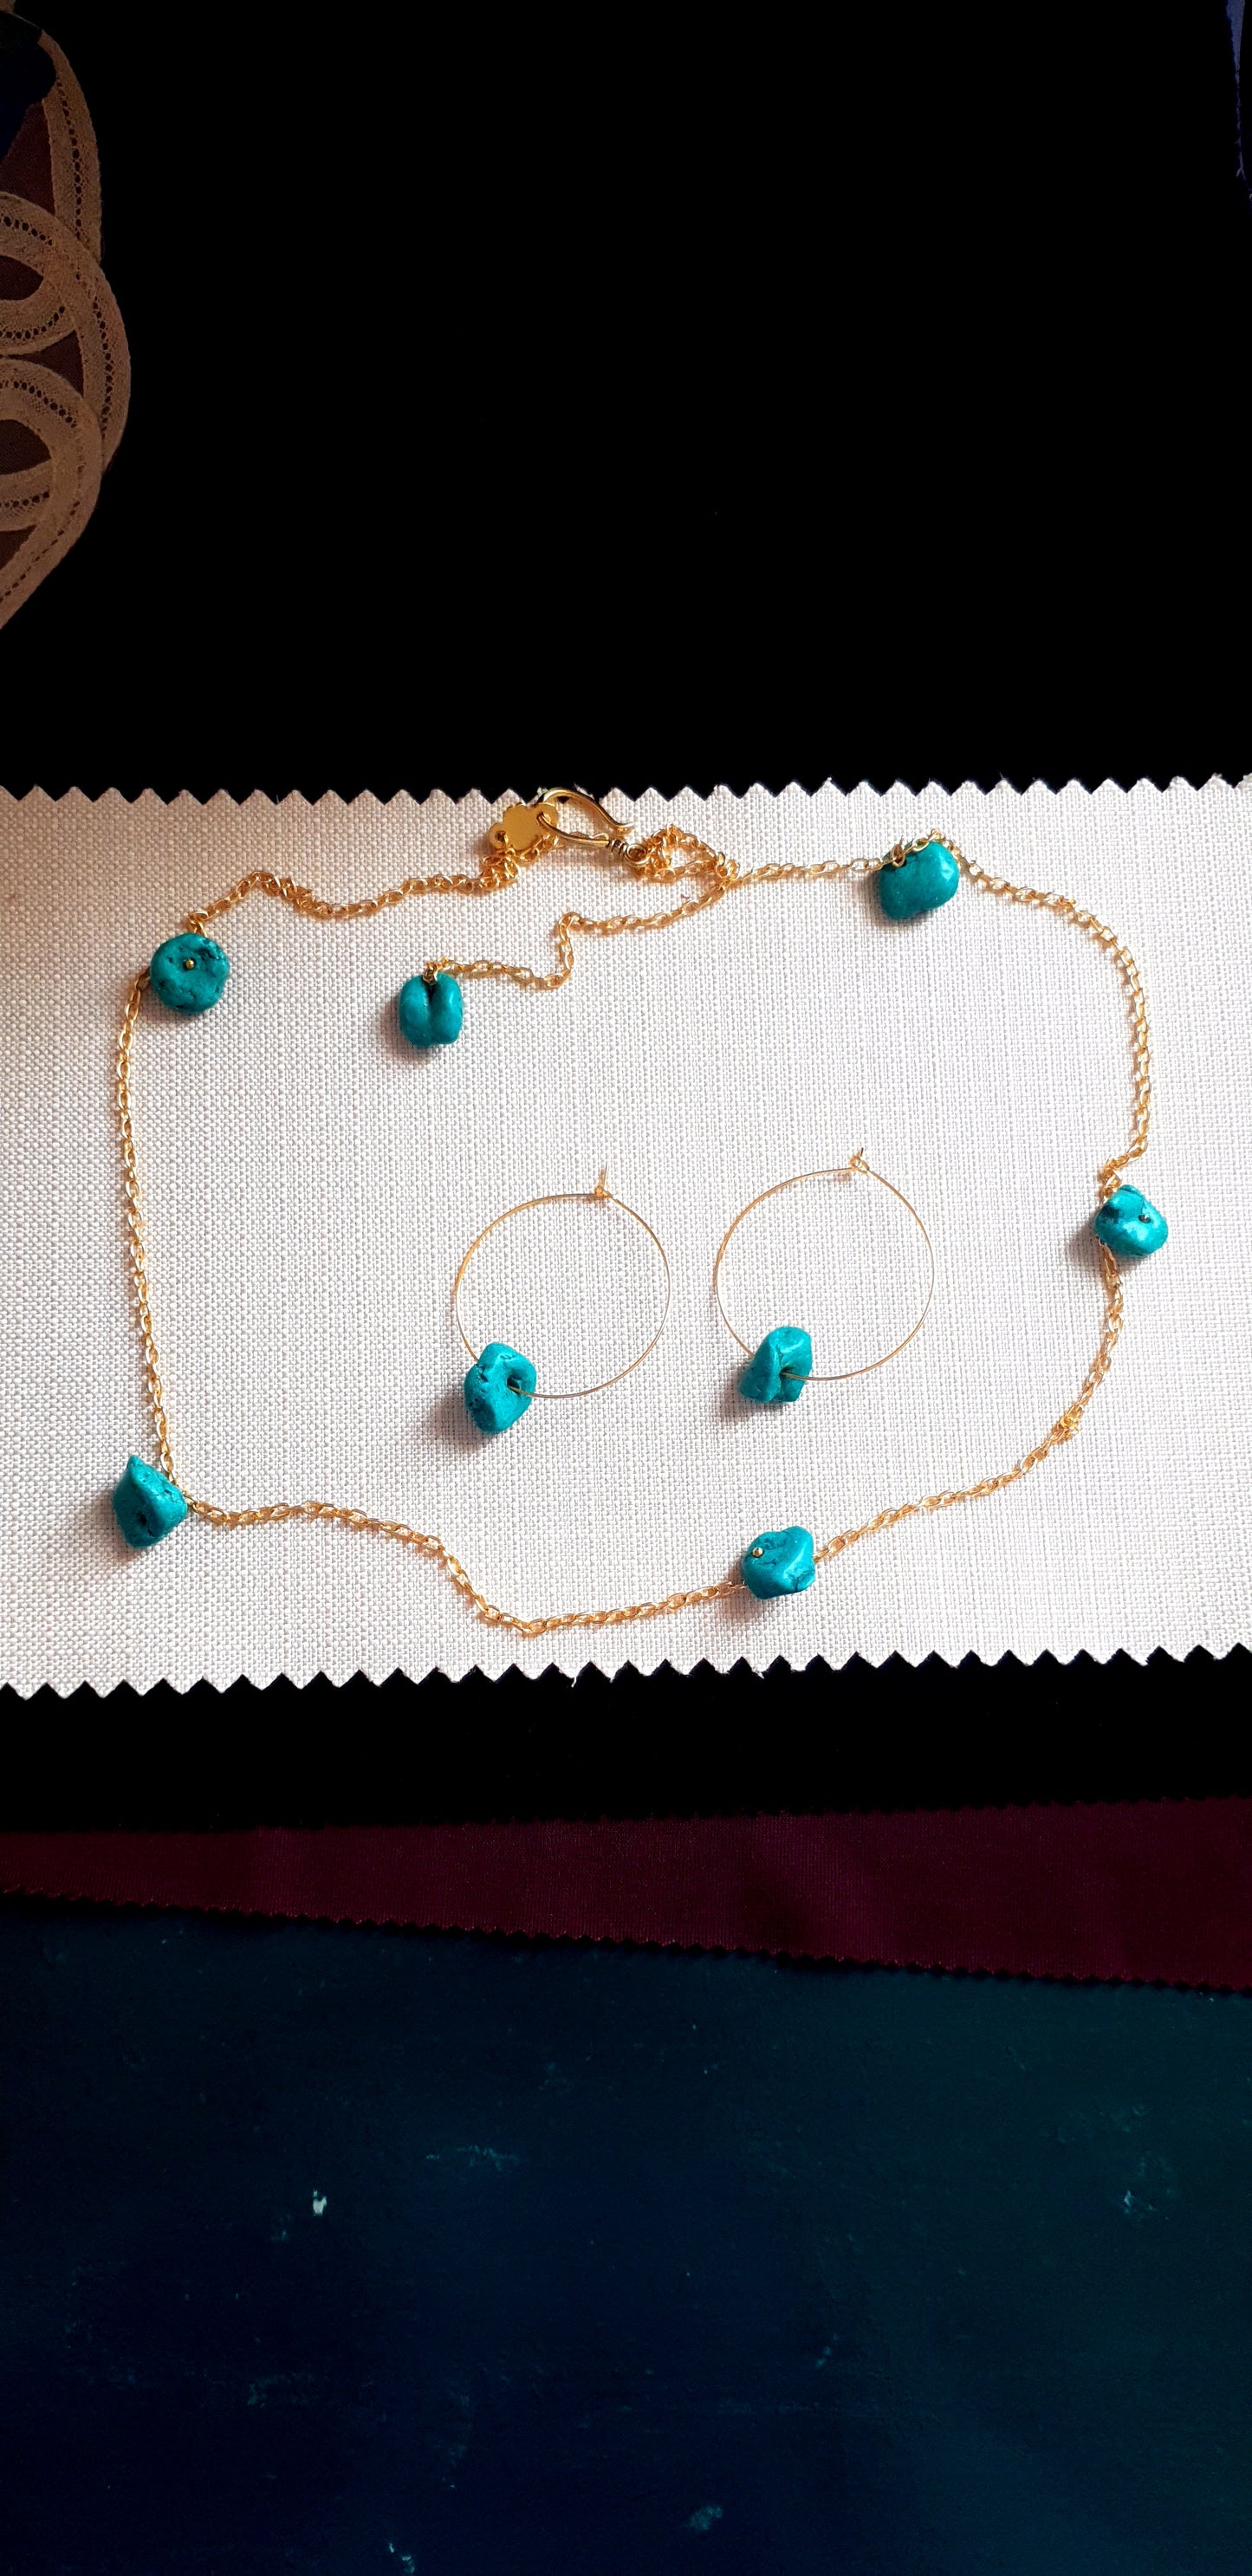 The simple Blue Green Necklace